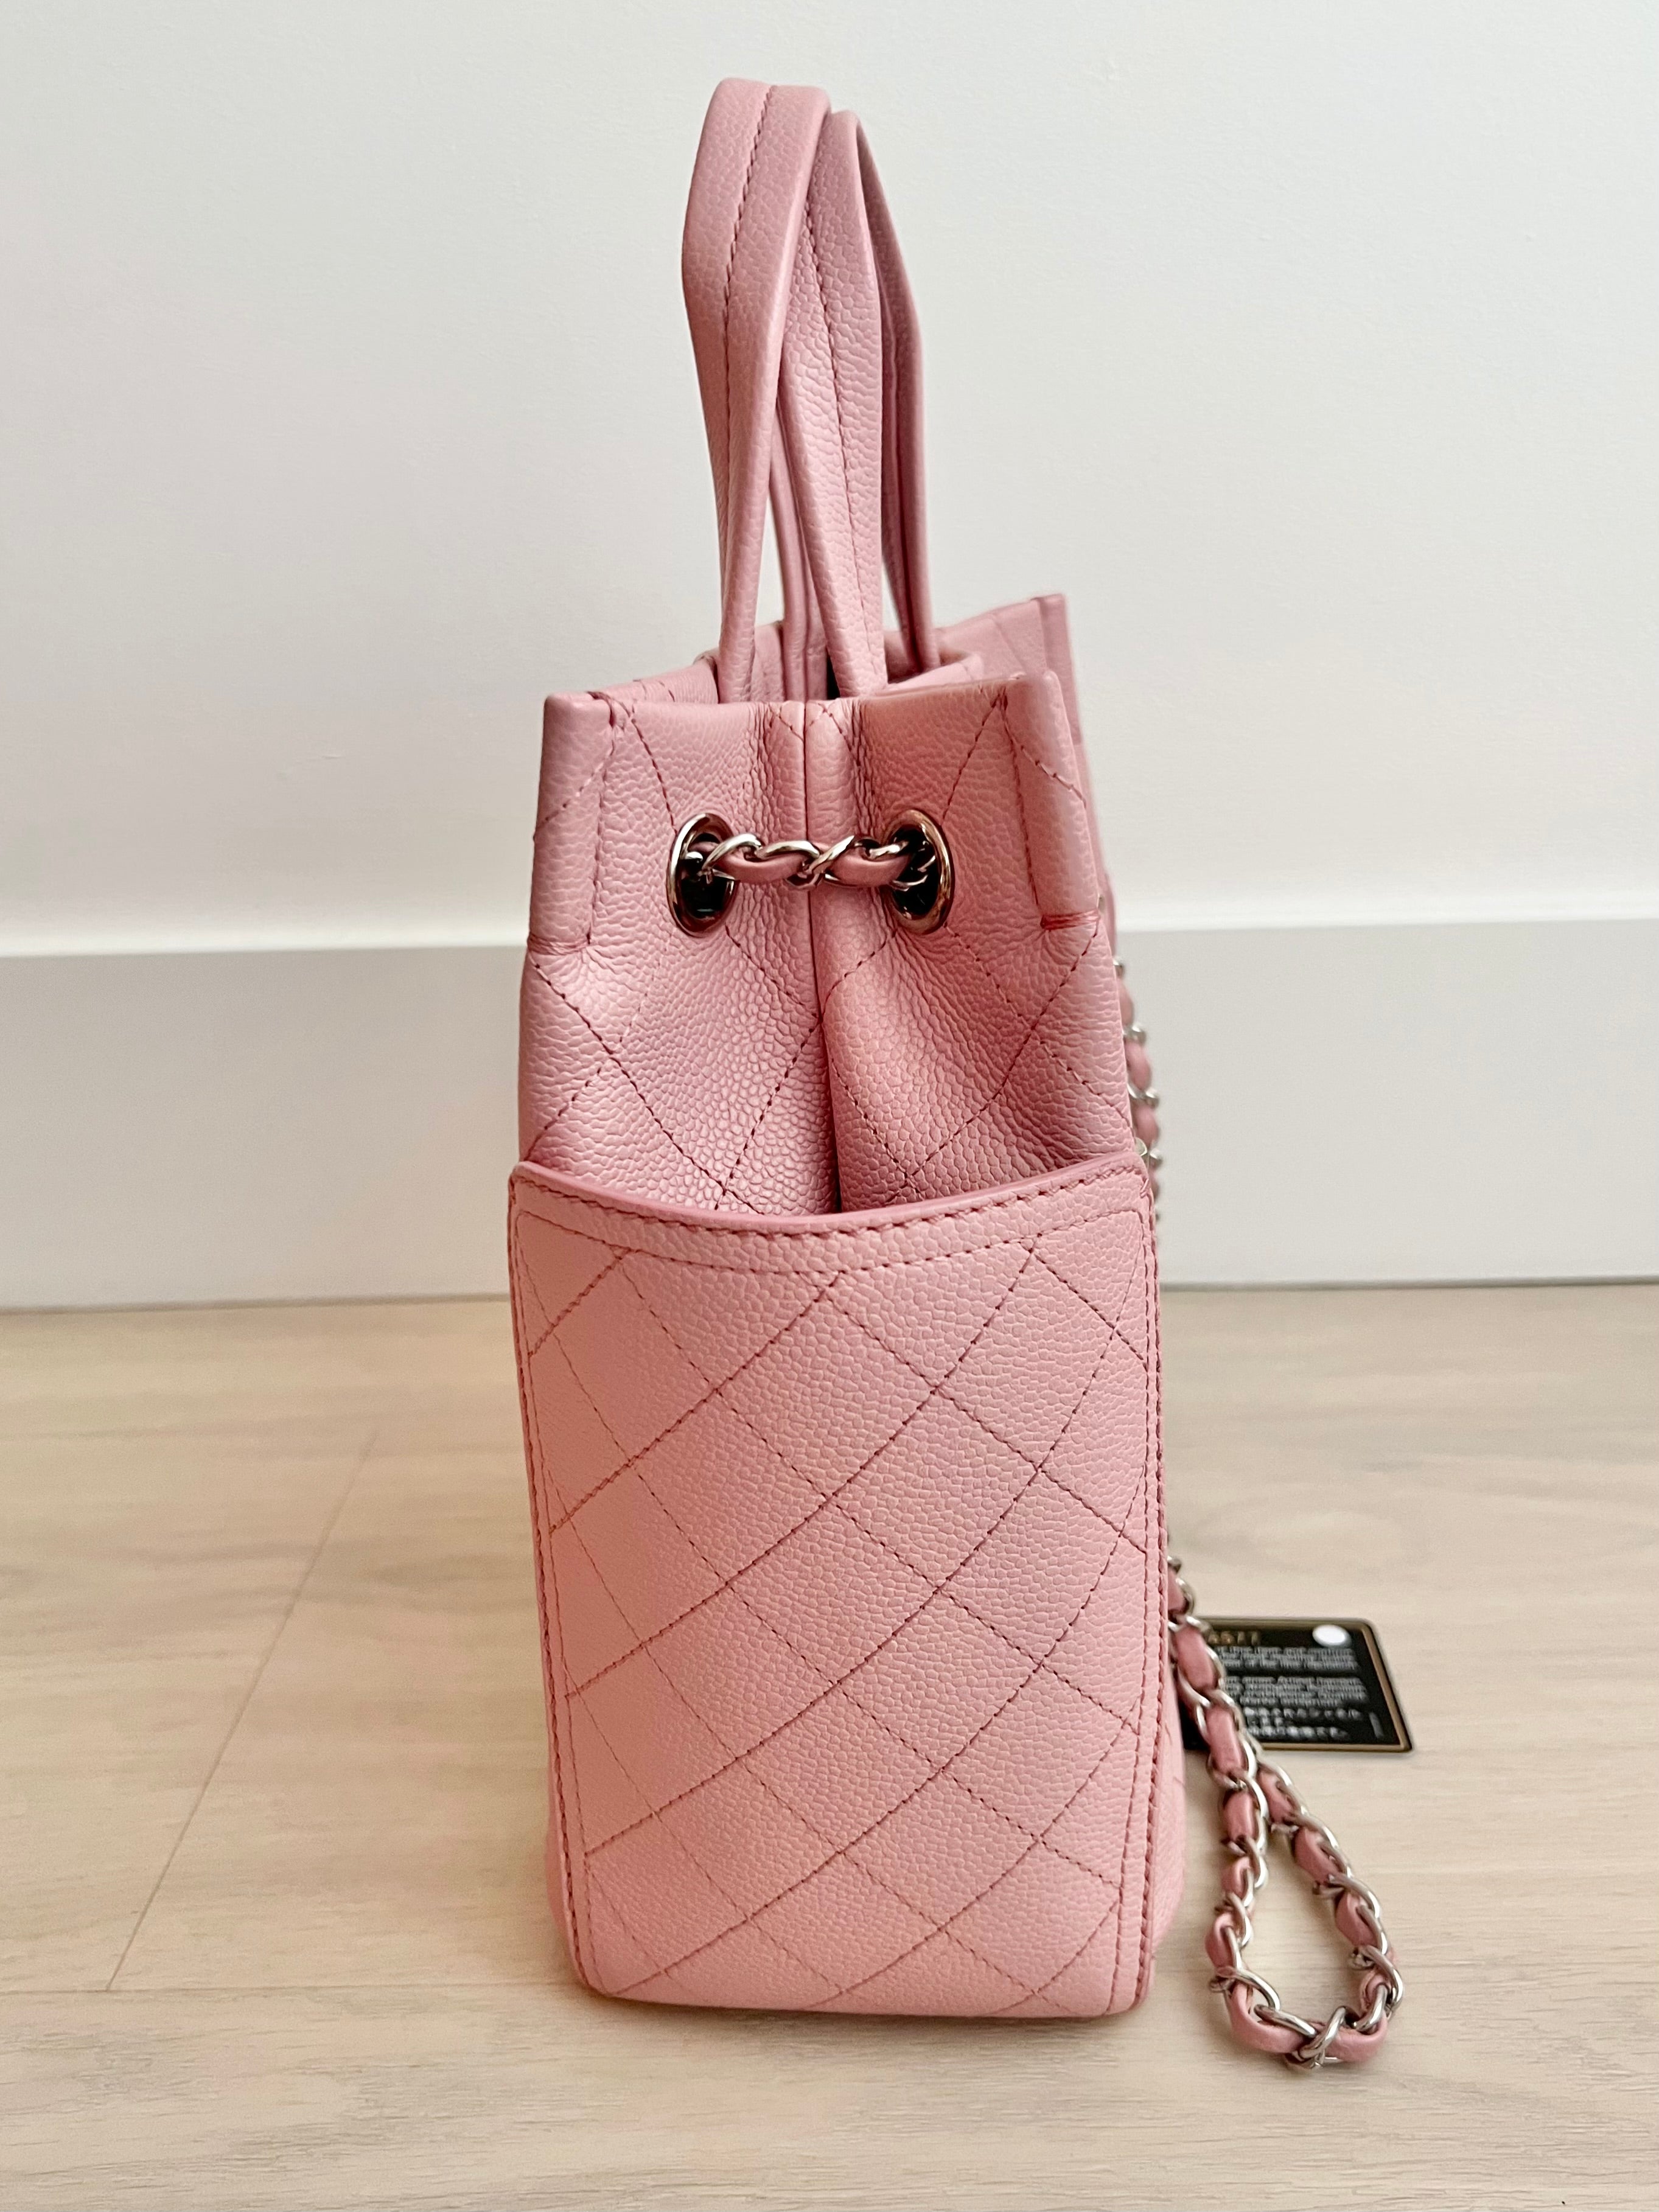 Chanel Shopping Tote Bag – Beccas Bags